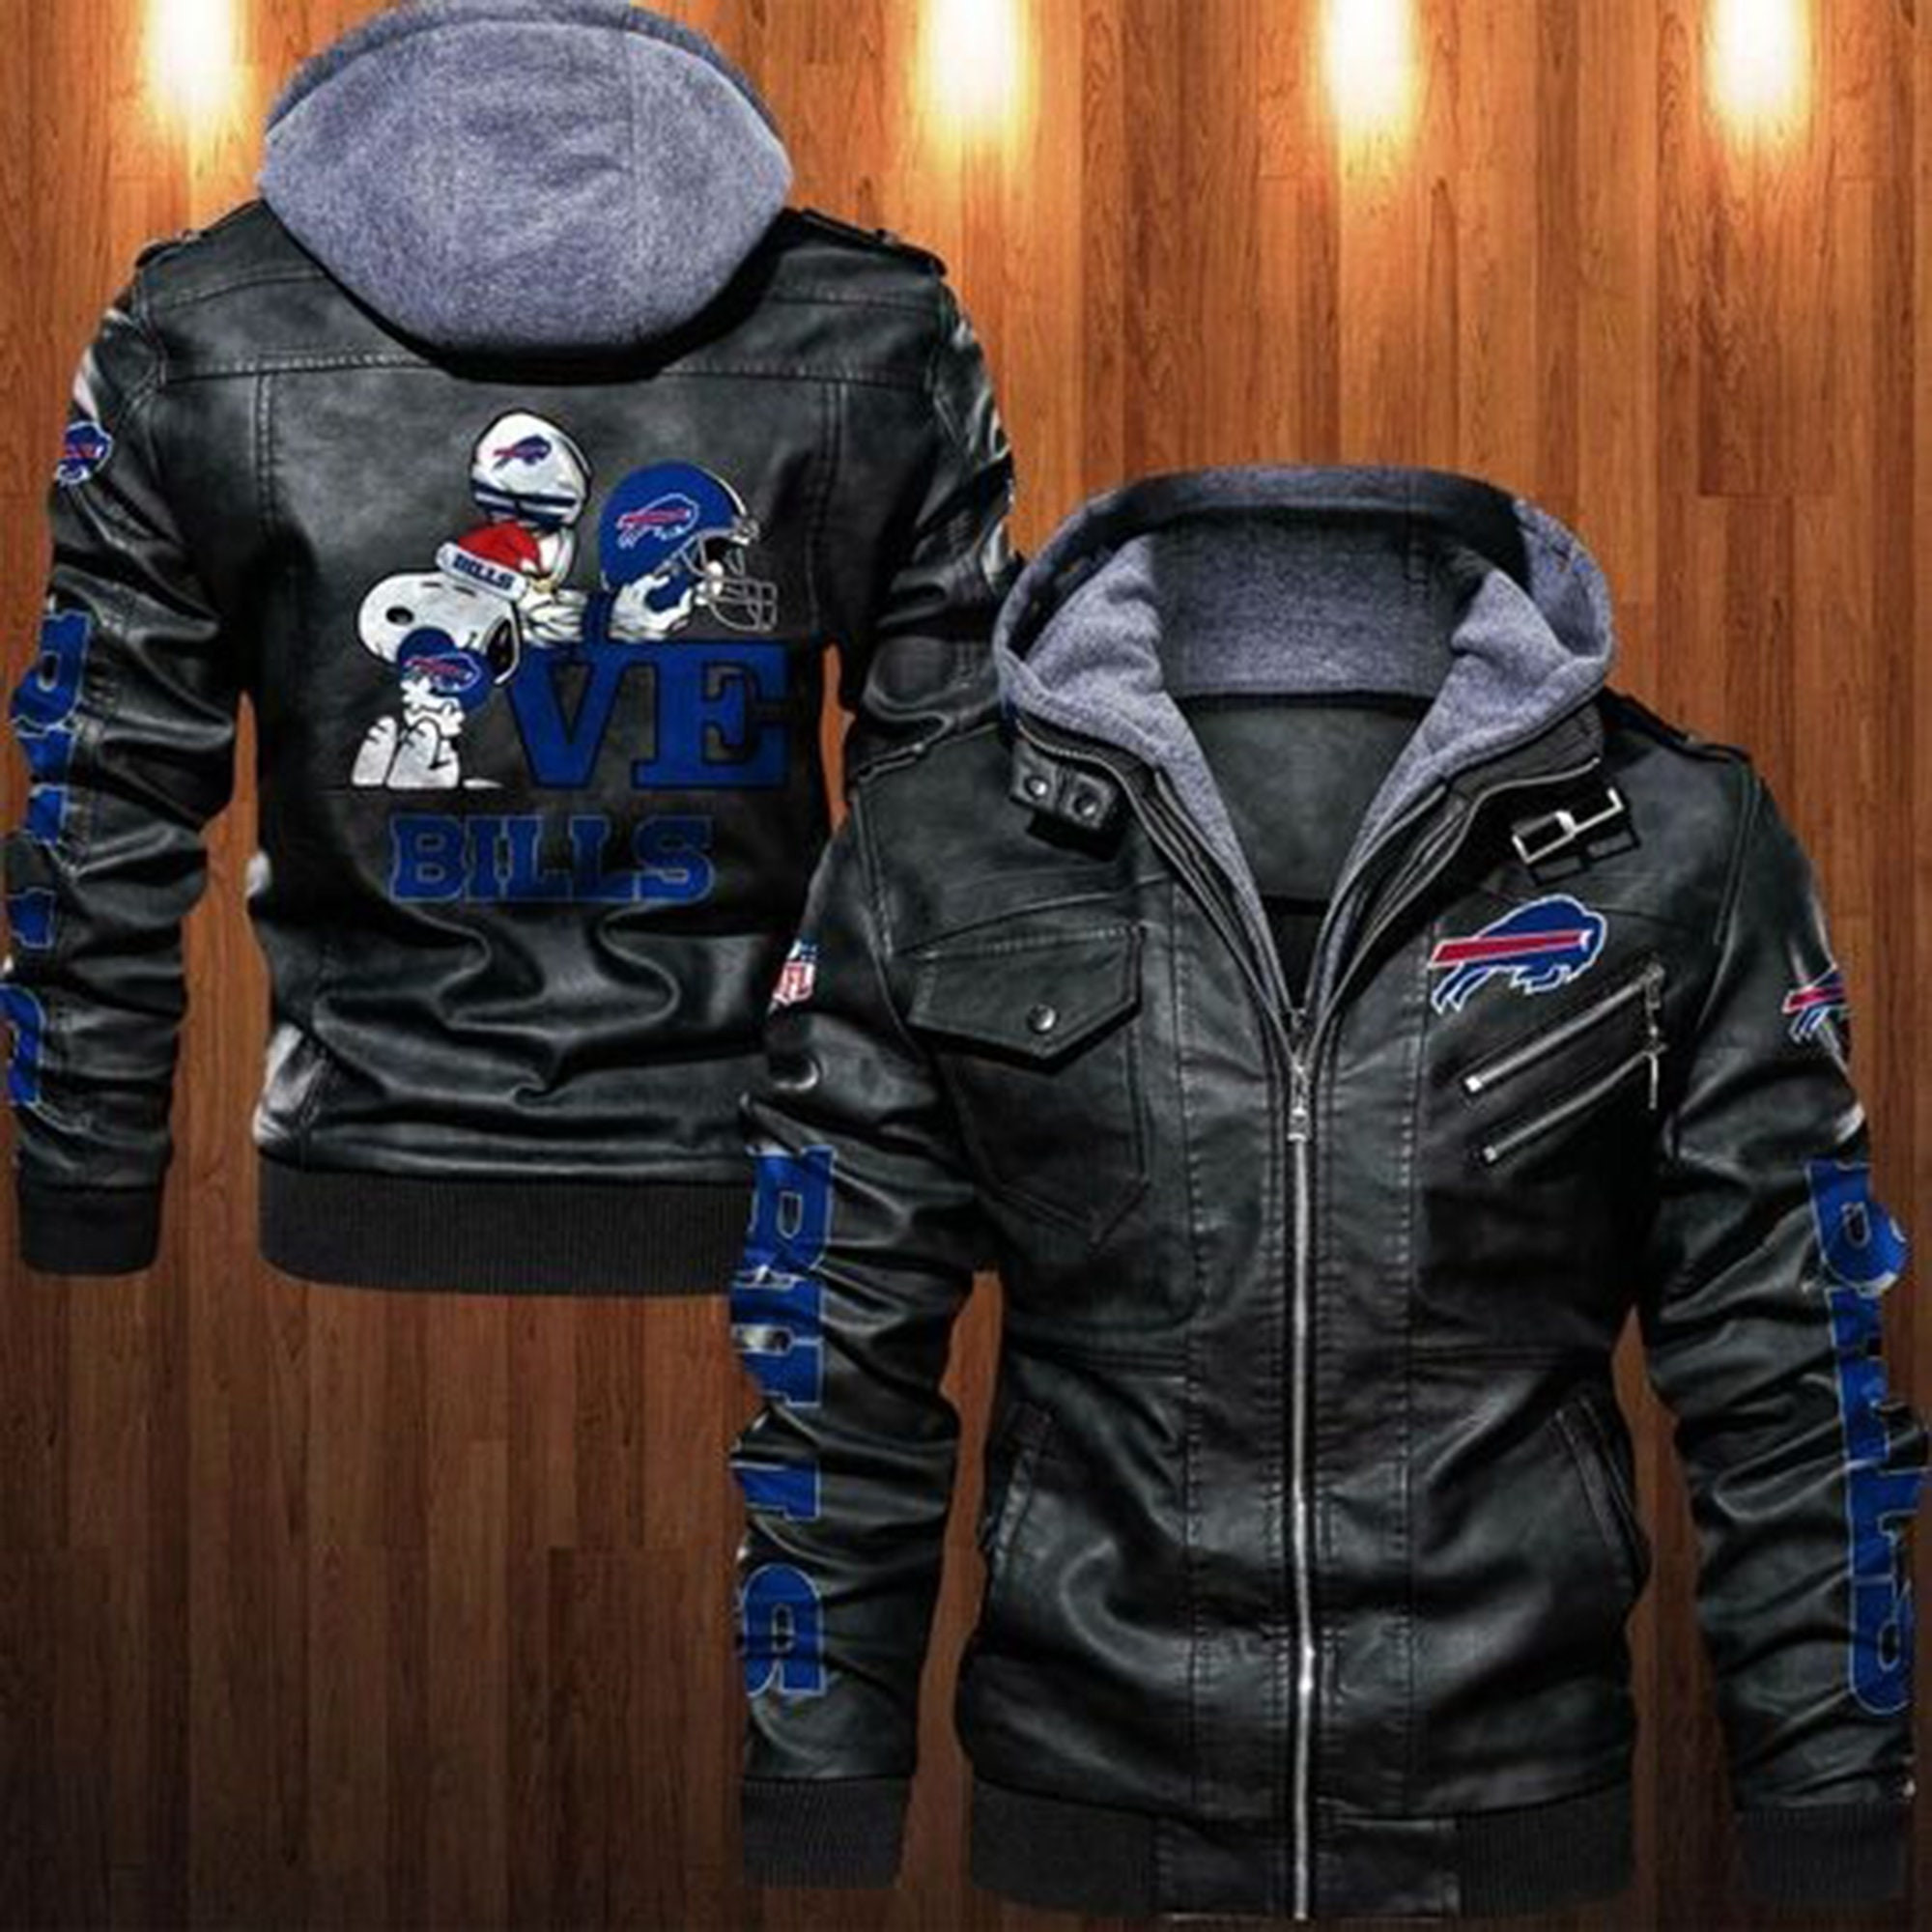 These Amazing Leather Jacket will add to the appeal of your outfit 143